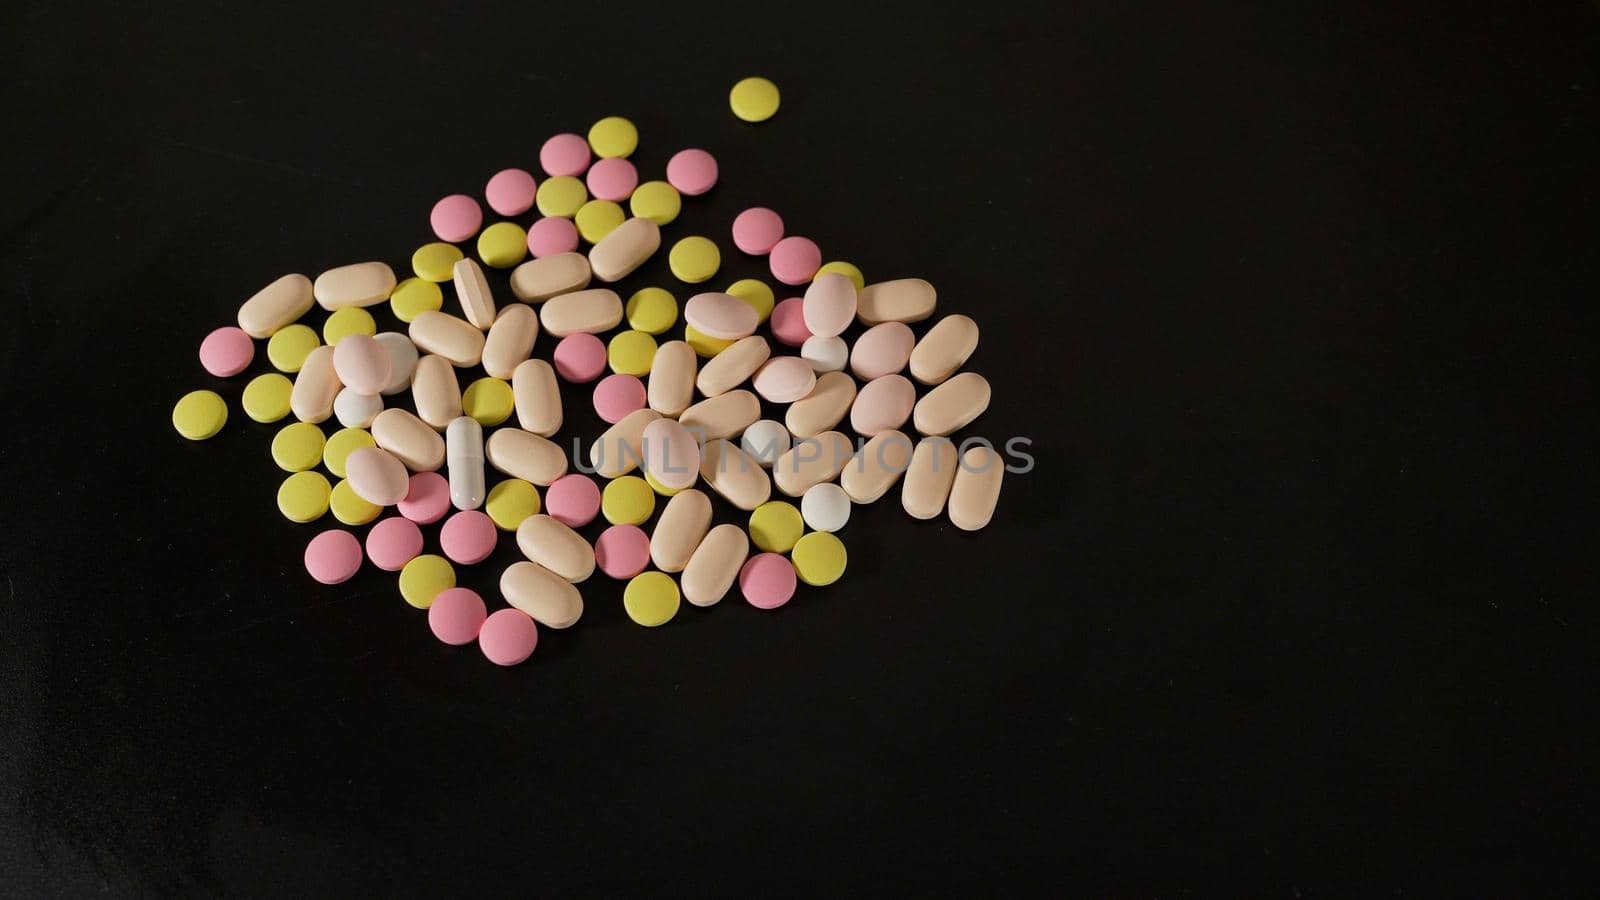 Medicines tablets, capsules, pills of different kinds, sizes and colors, piled up in bulk.Colored vitamin close up. Tablets of different sizes close-up. by Rusrussid